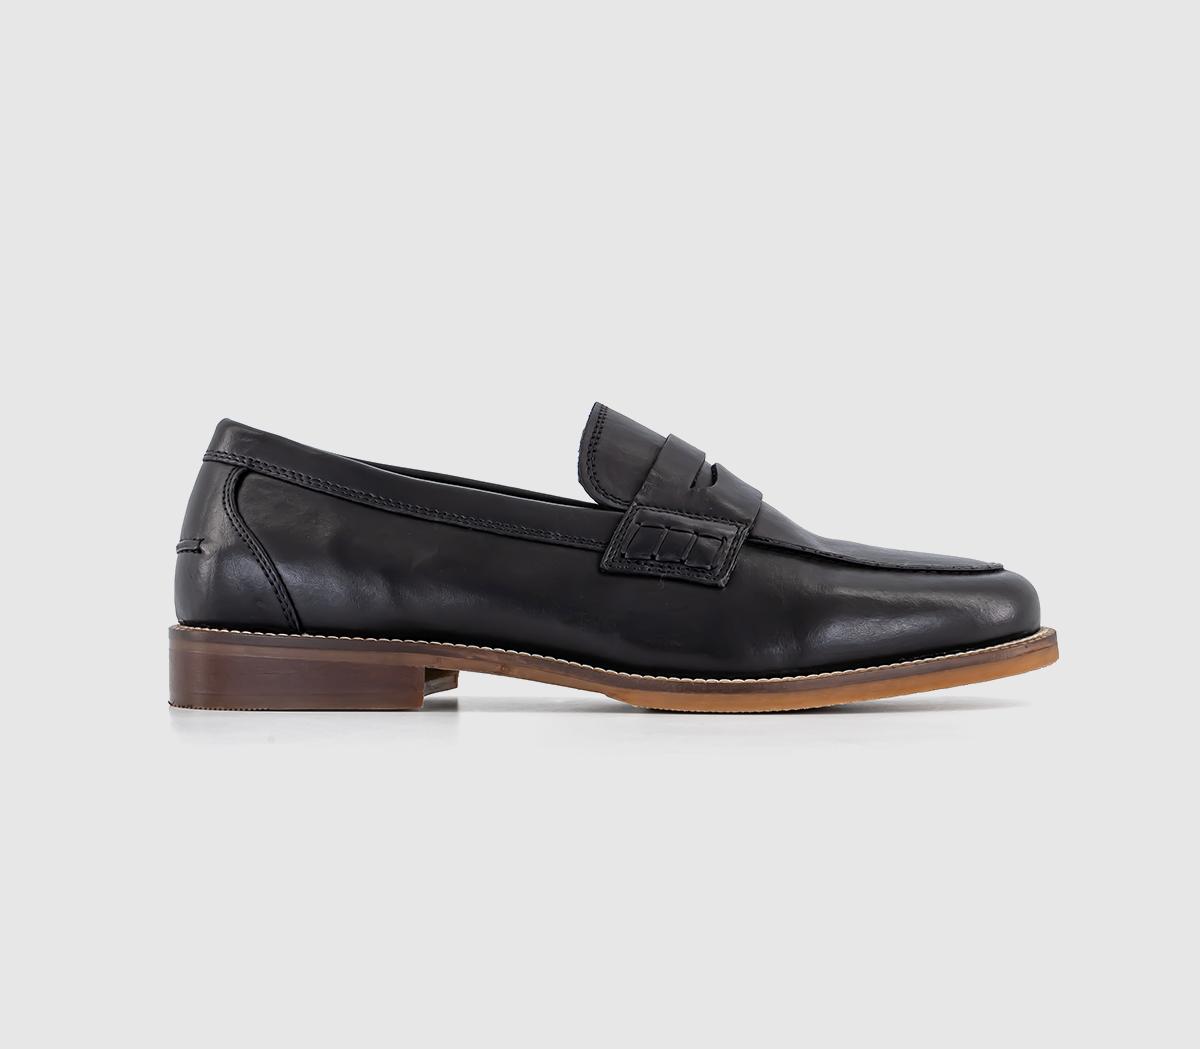 OFFICEMarlborough Penny LoafersBlack Leather